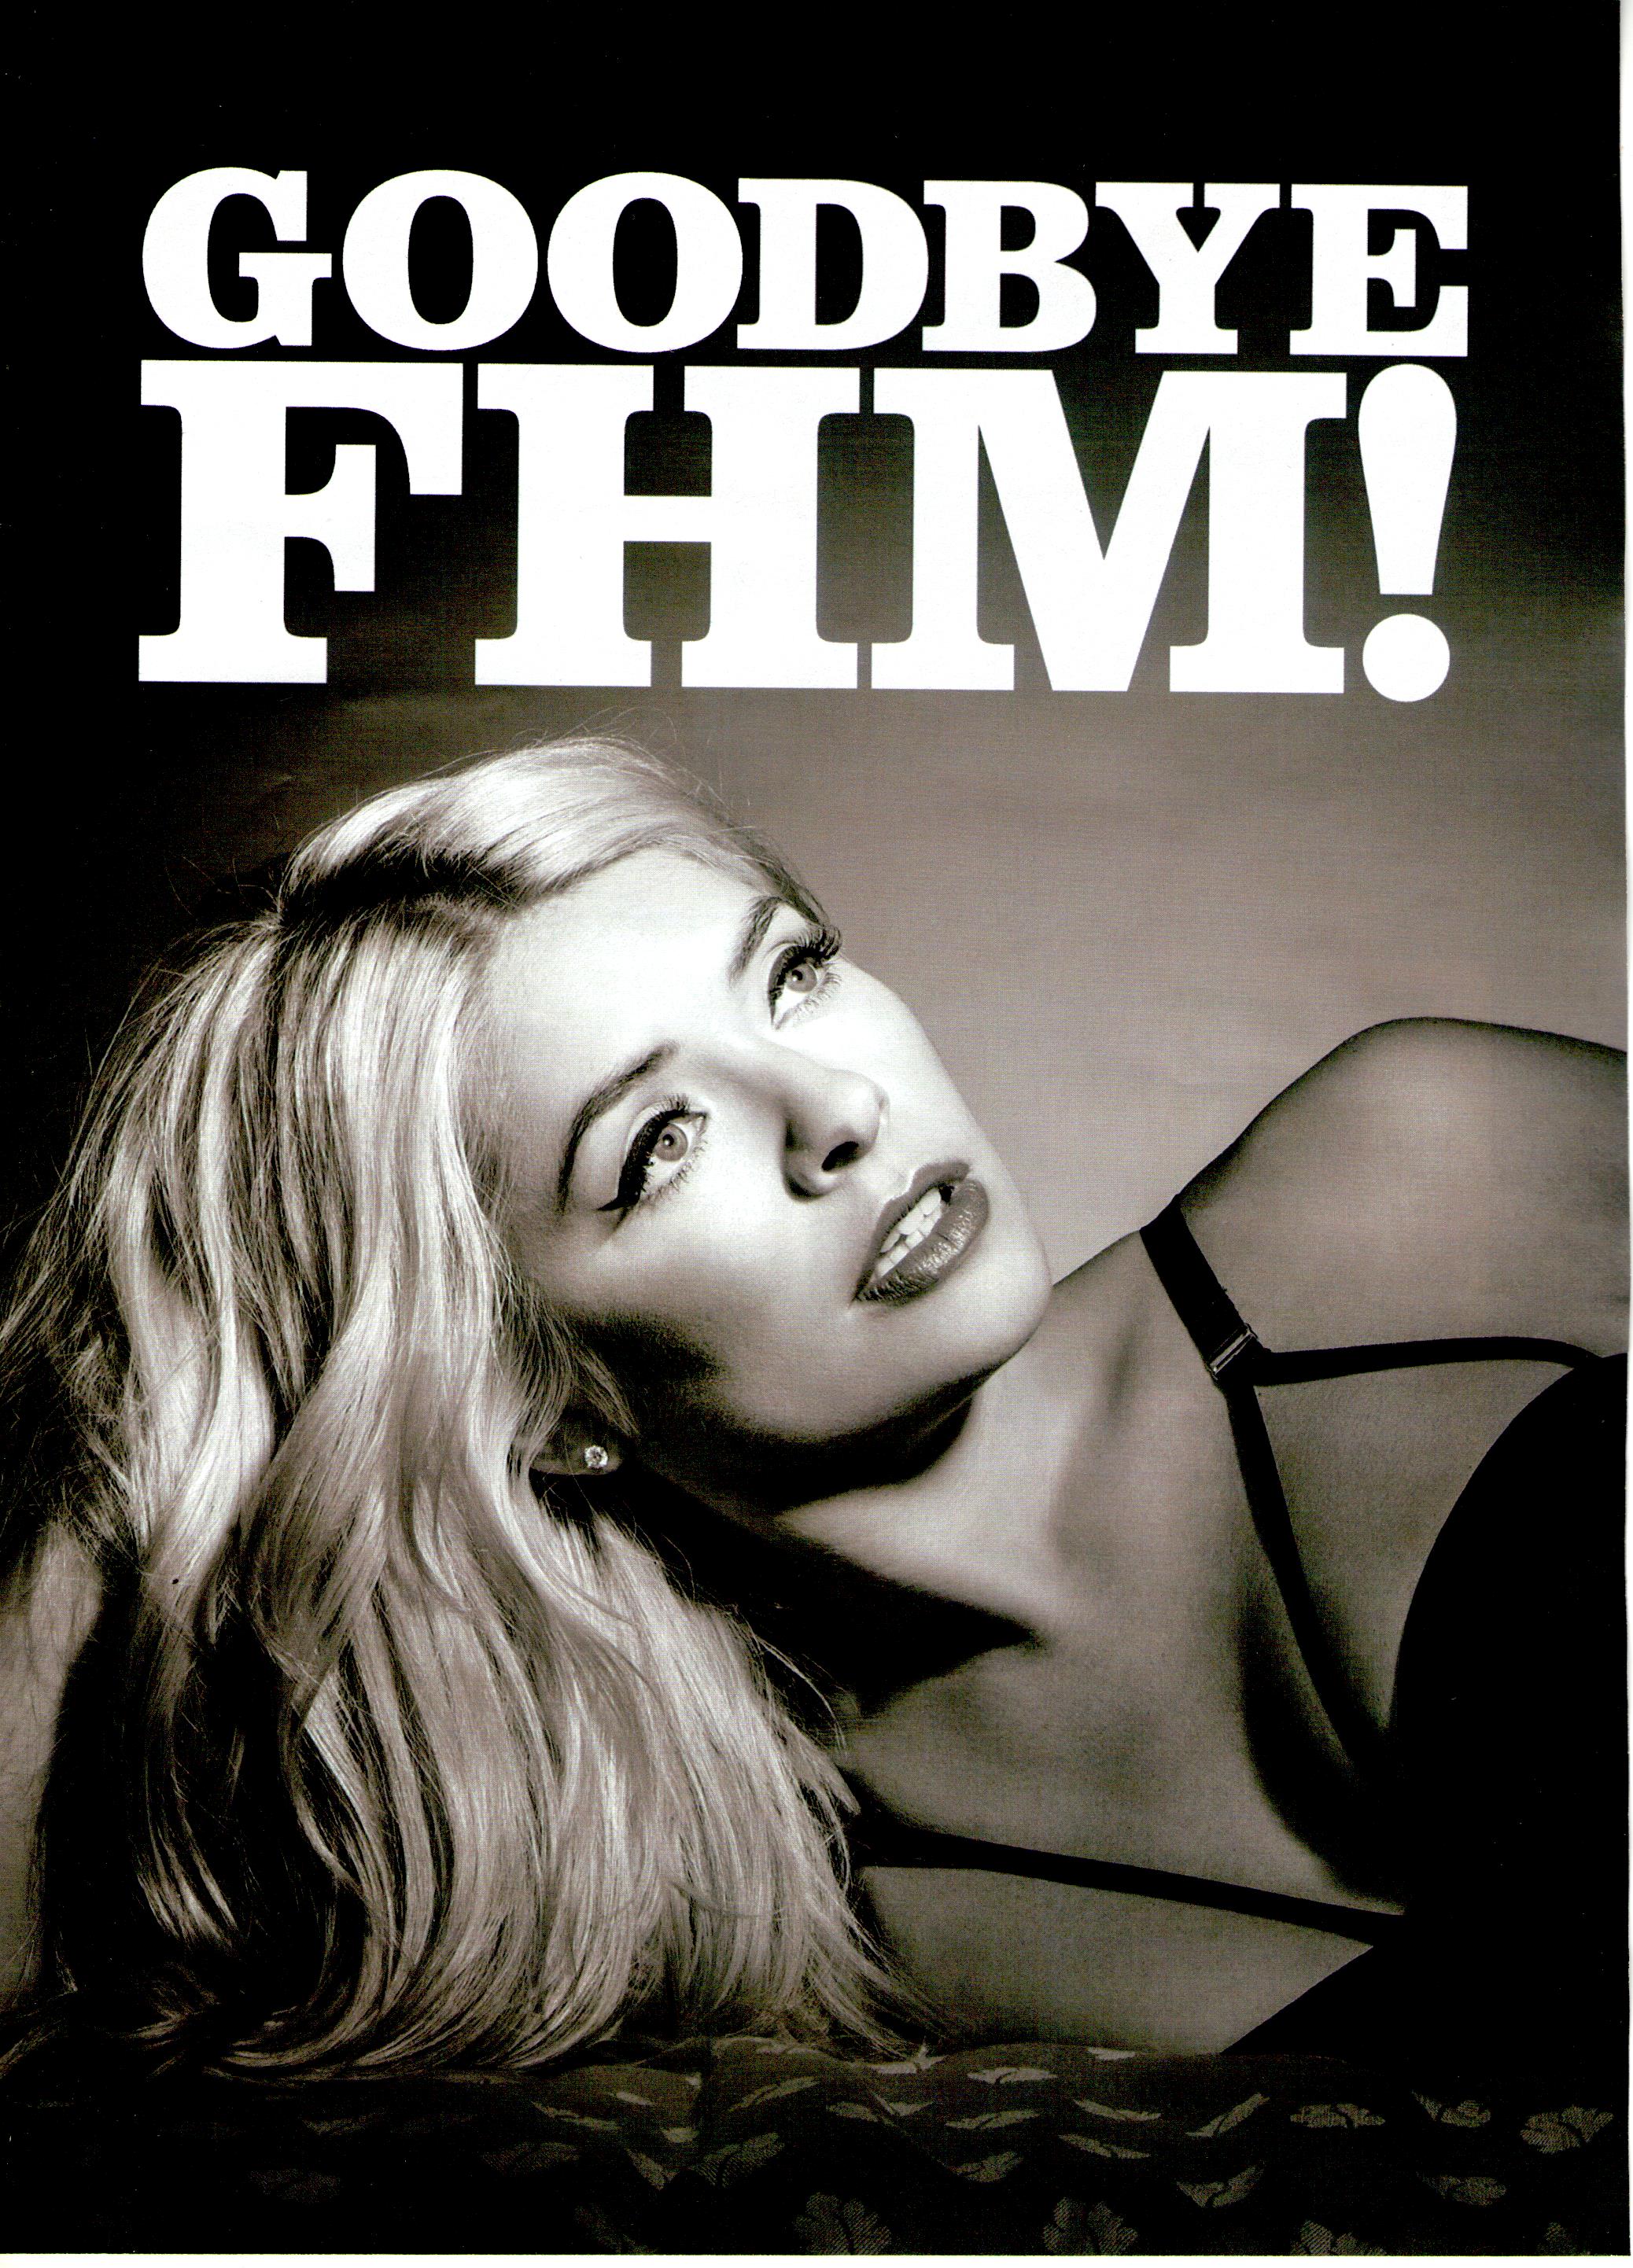 Holly Willoughby sexy FHM Magazine 2016 February 23x HQ photos 14.jpg